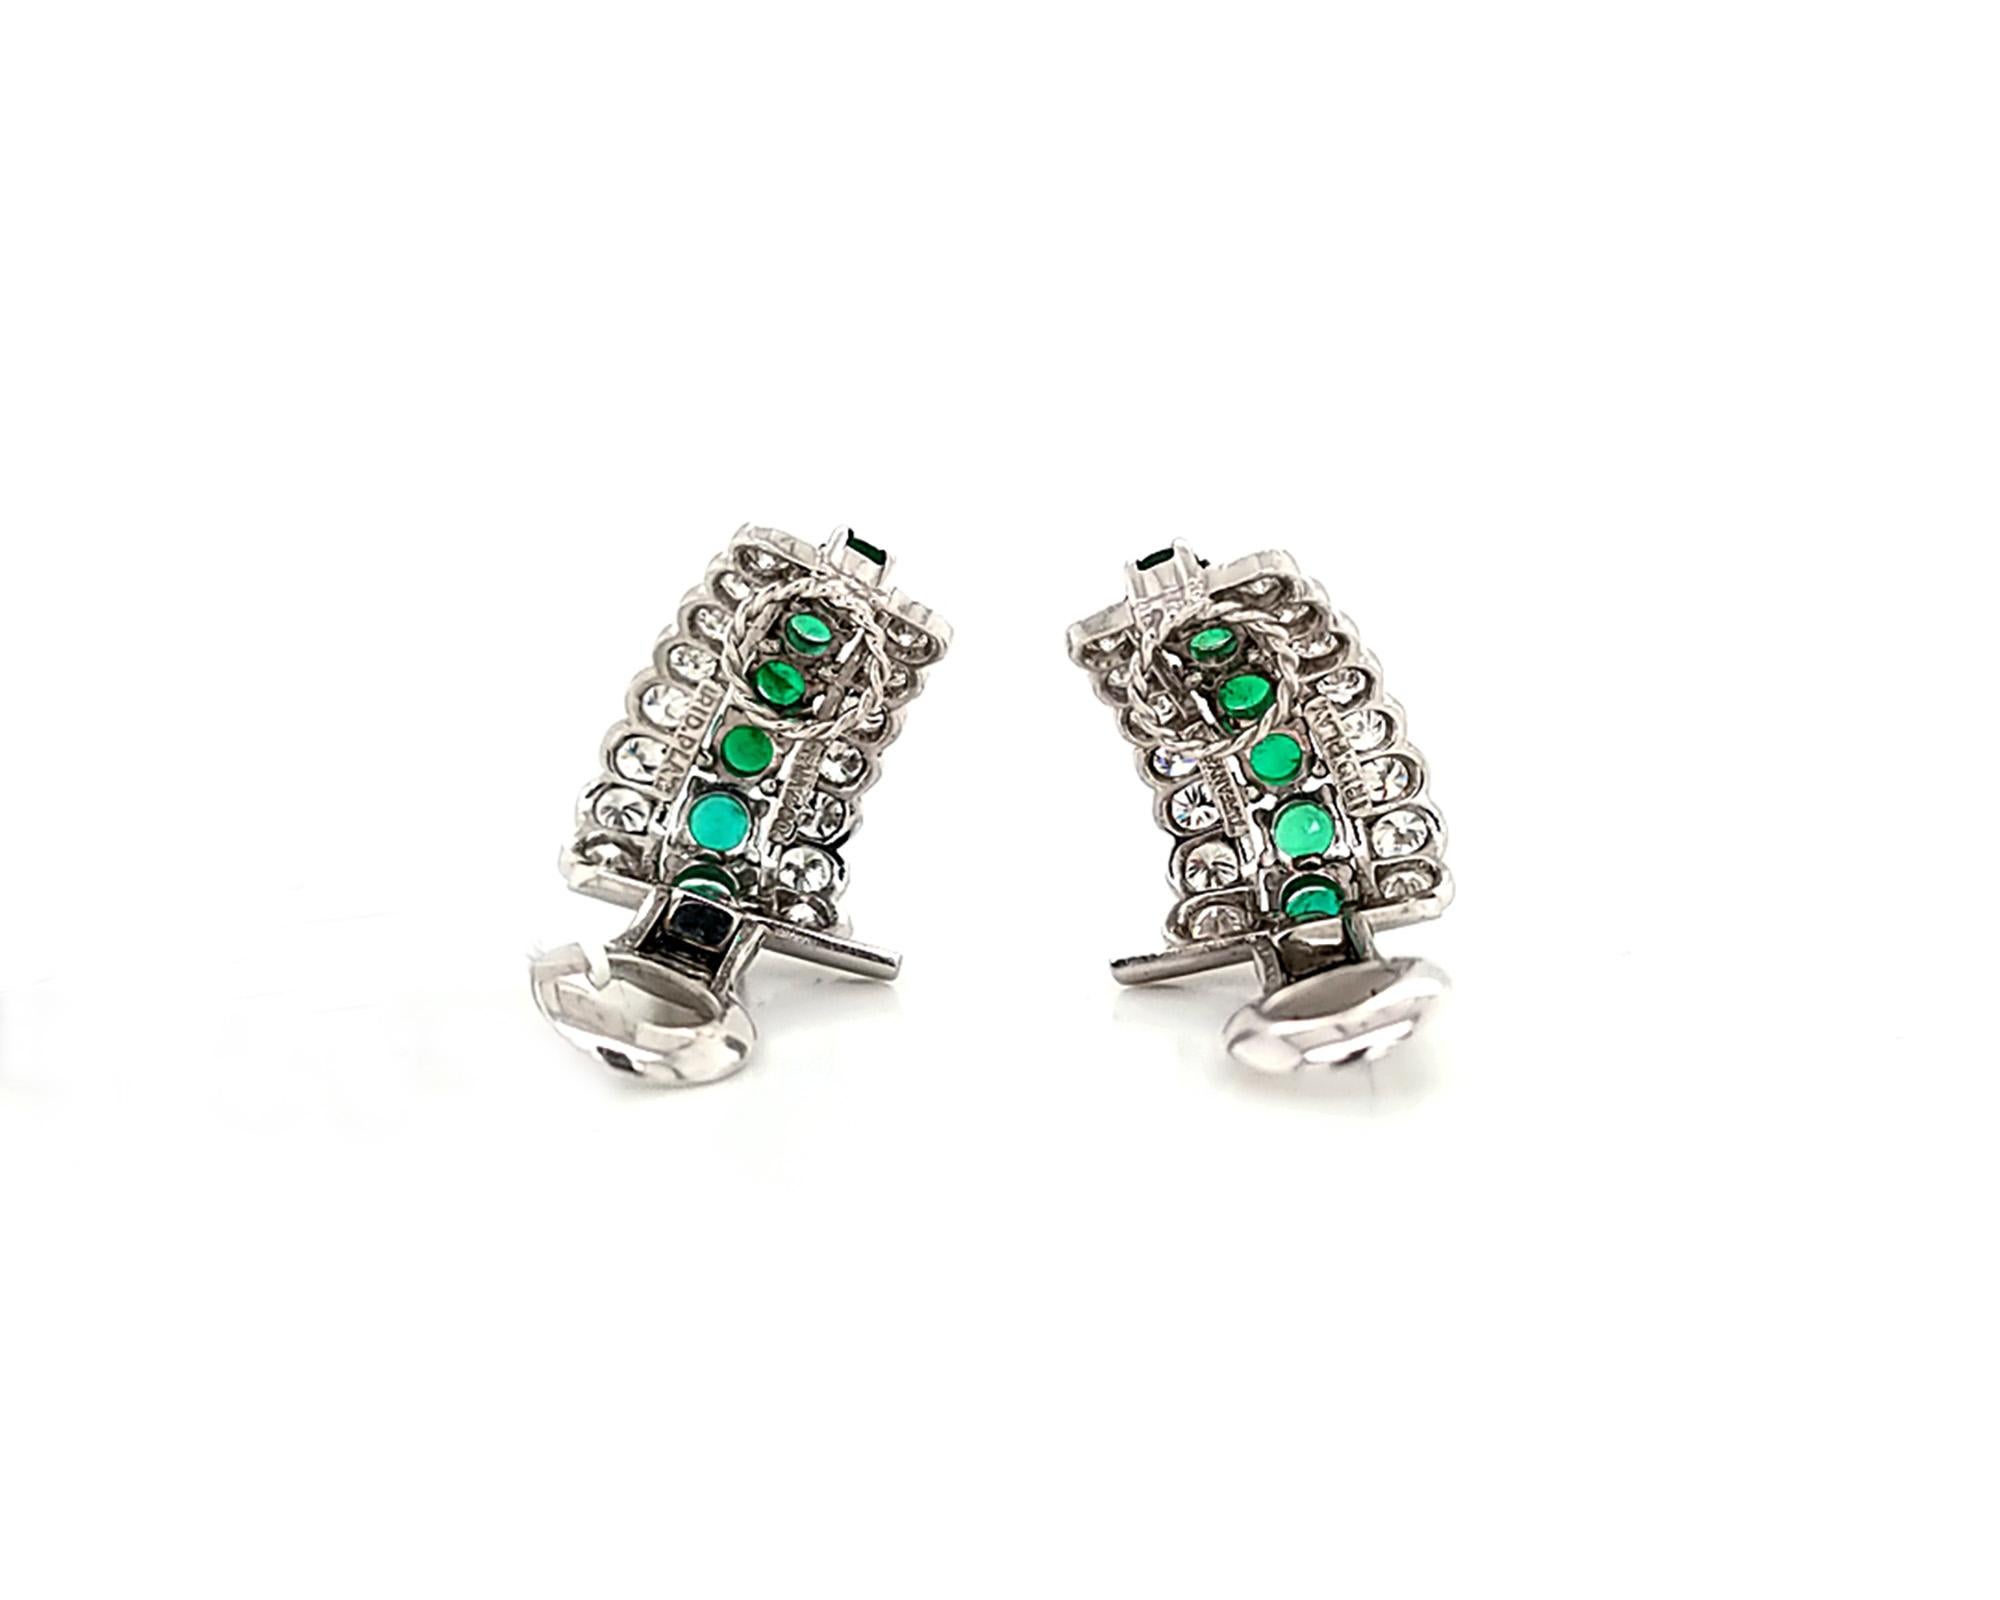 Beautiful ear clips created by Tiffany & Co.
The earrings are embellished with round emeralds and diamonds. 
Made in platinum. The weight is 9.23 grams.
Pre-owned, no signs of use, is in perfect condition.
Come with the original box.